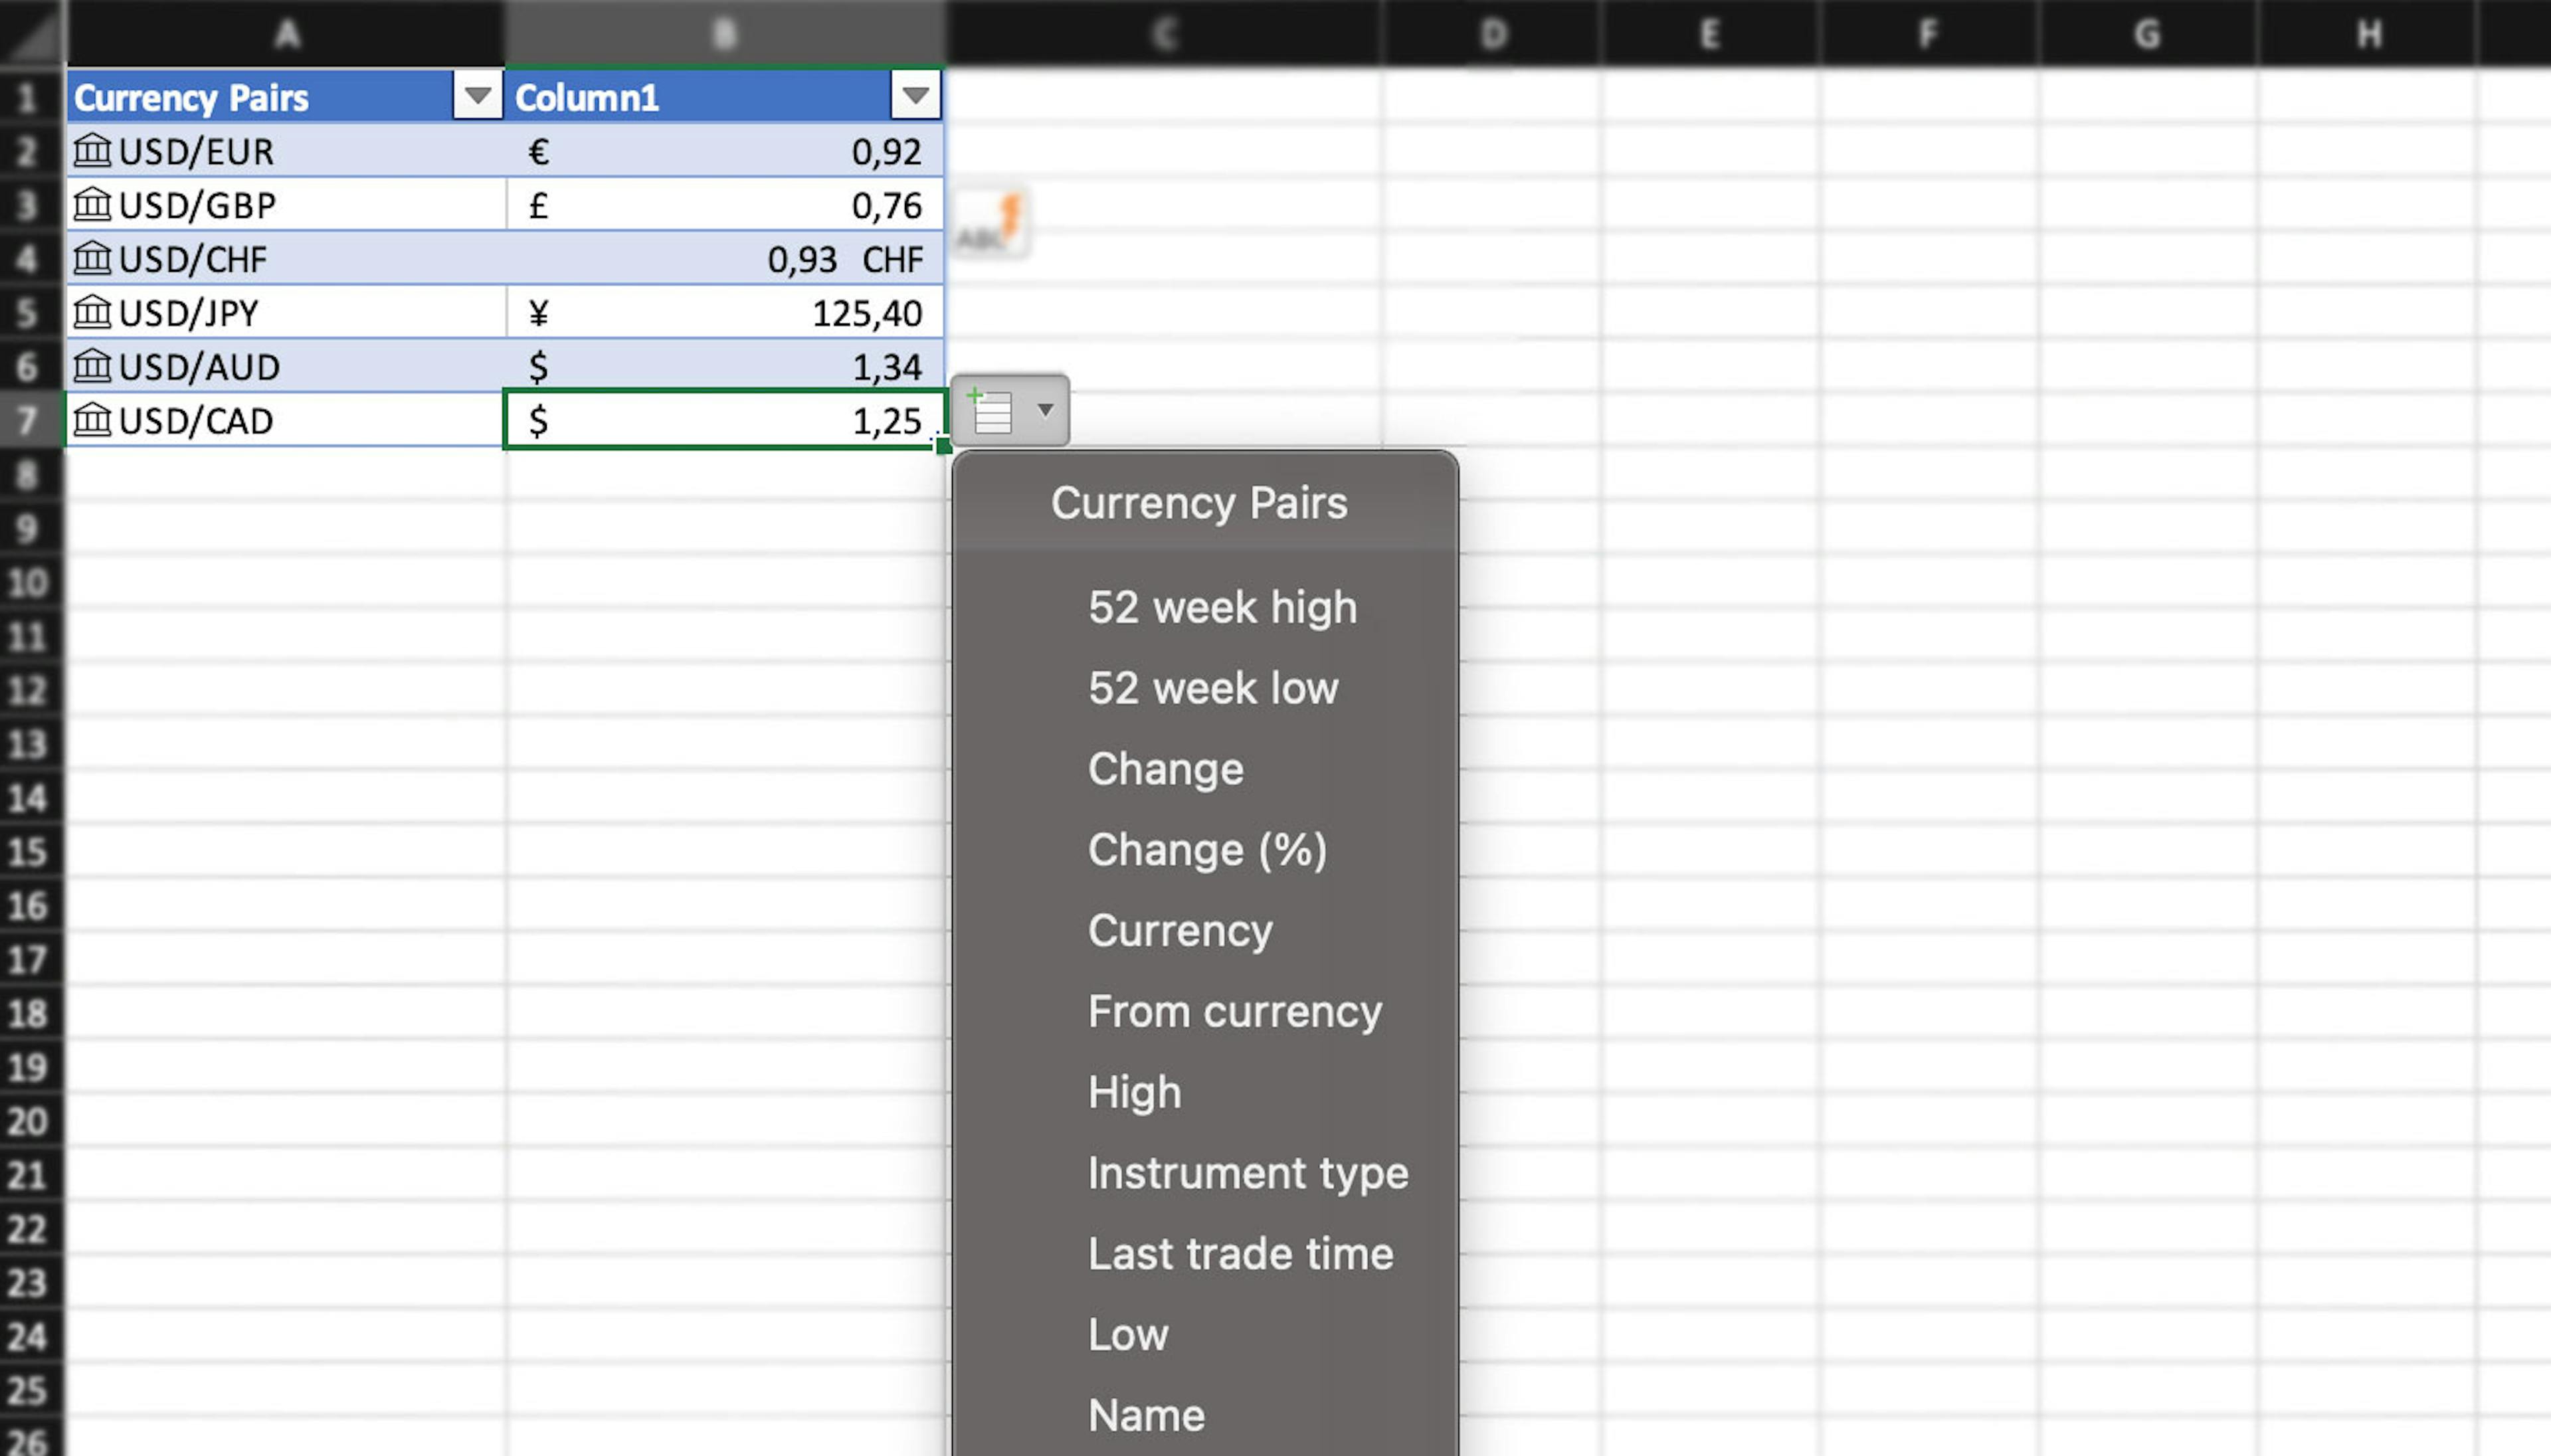 Using the icon to see all the currency data categories